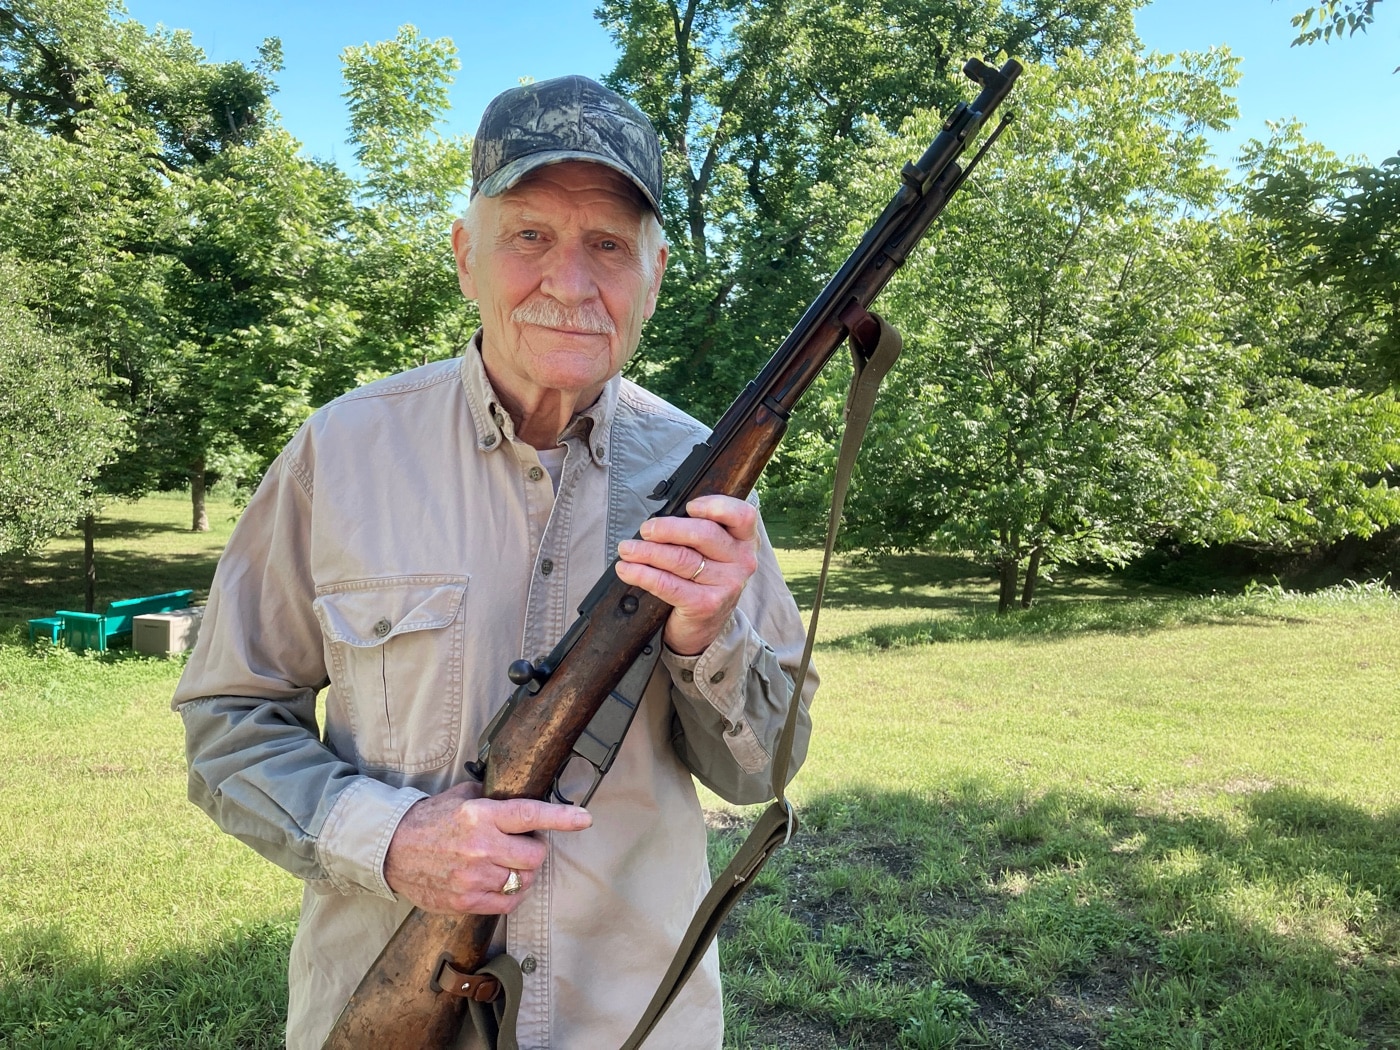 Dale Dye with Type 53 rifle from Vietnam War